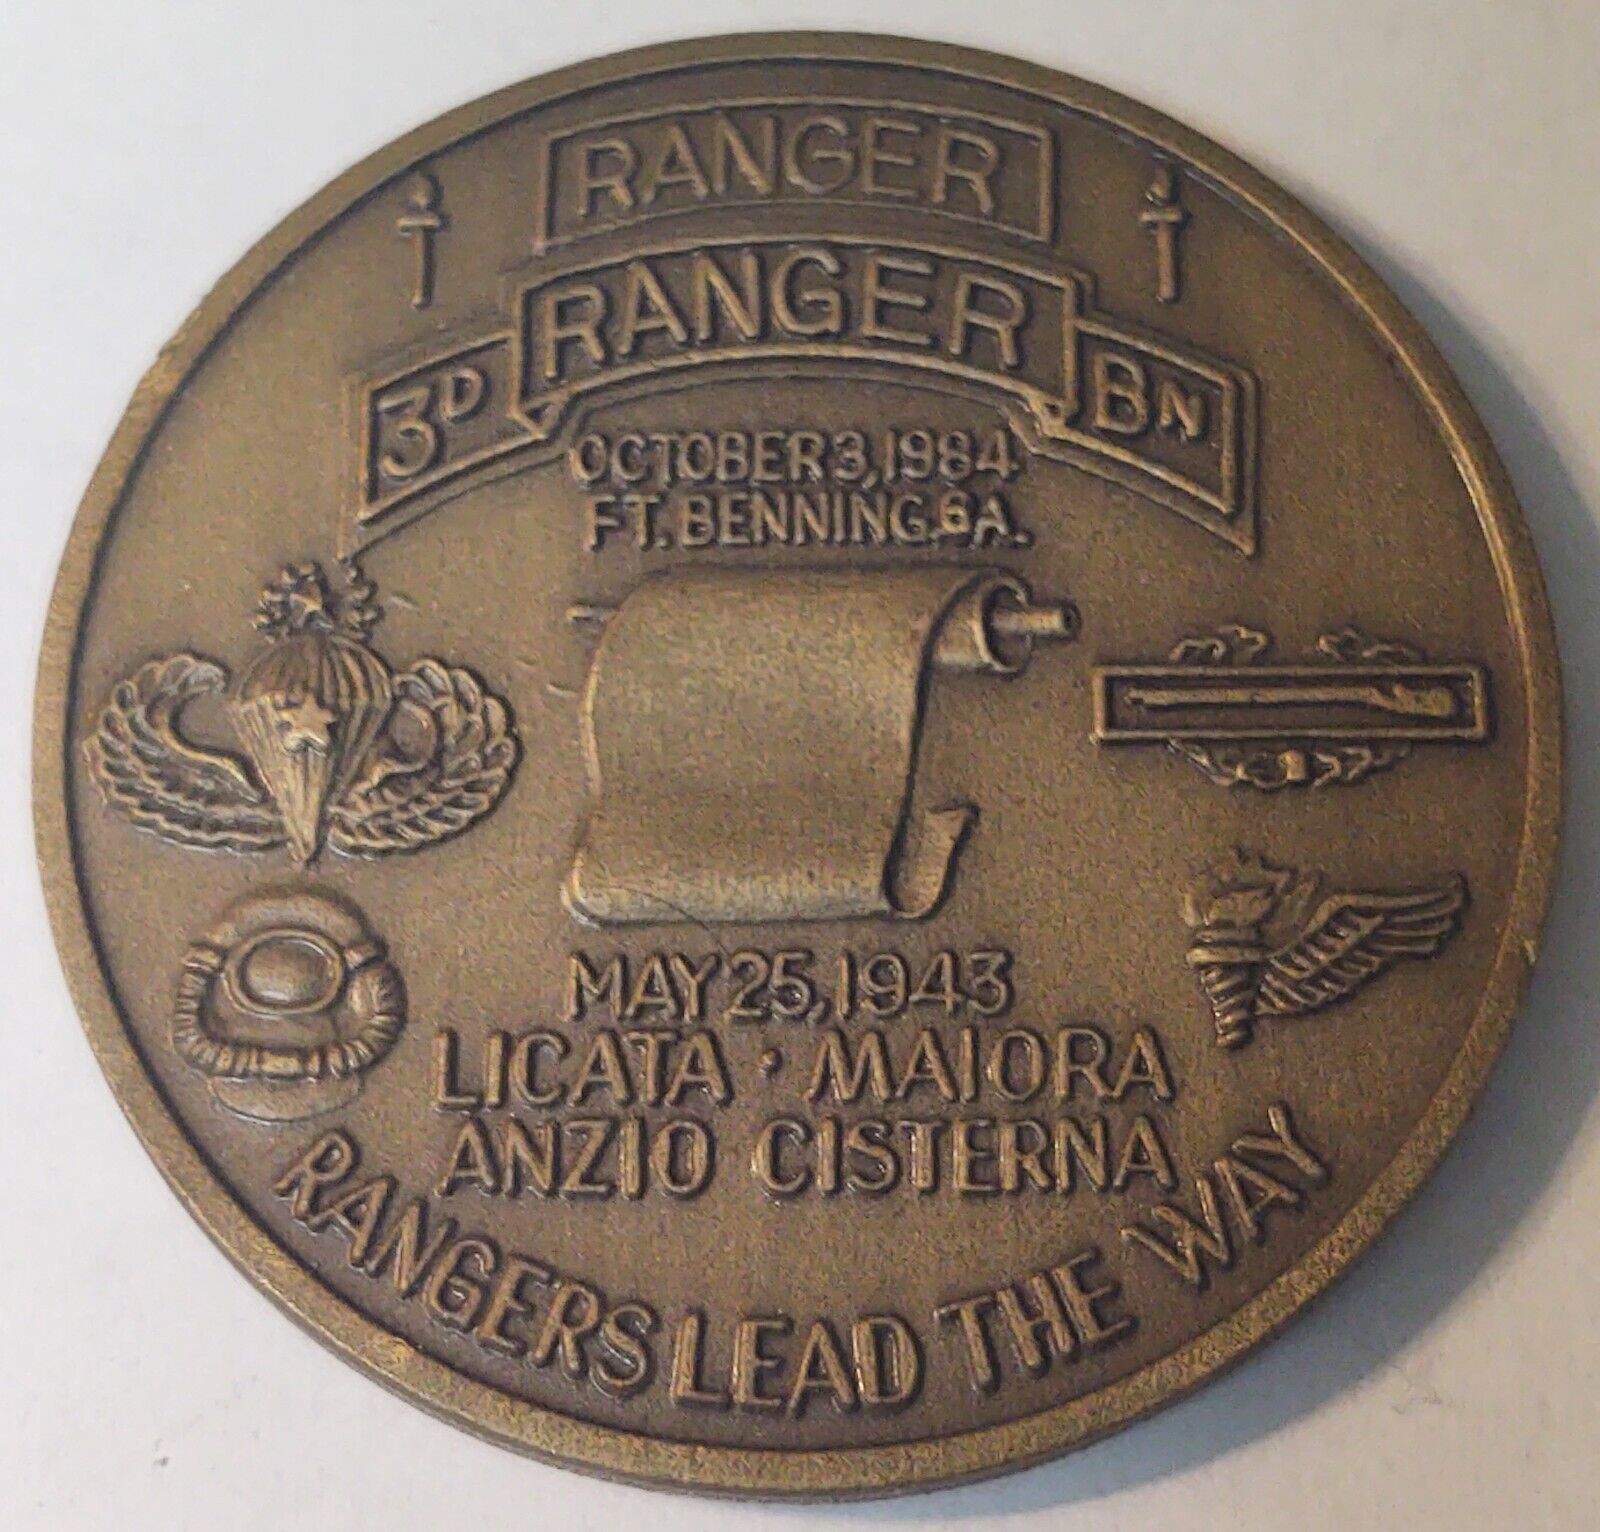 🔥 Vintage 1990\'s US Army 3rd Ranger BN 75th Infantry Challenge Coin Panama